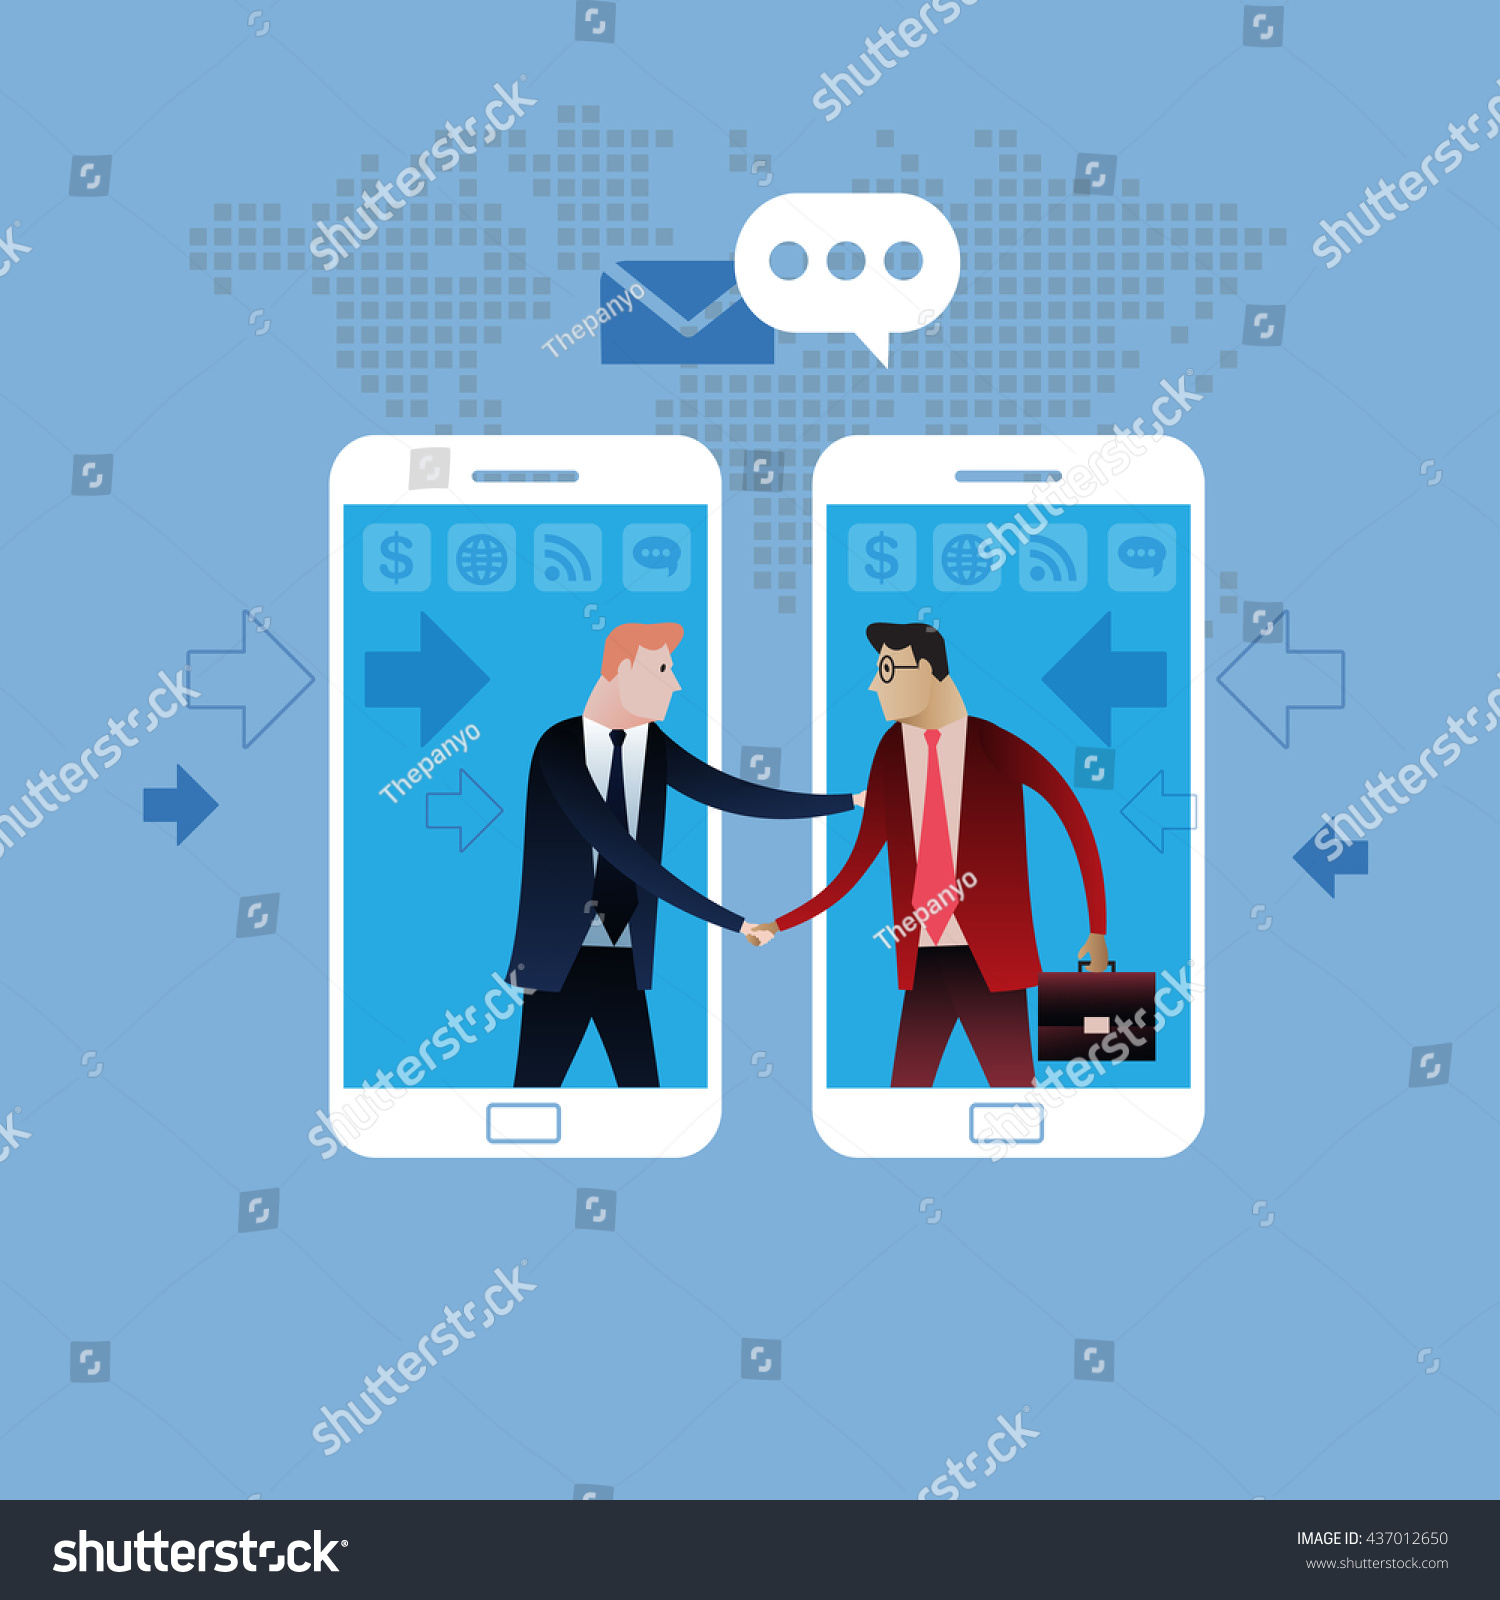 Deal on Mobile phone. Handshake of two business people with cell phone background. On line deal. Business concept illustration vector clip art design #437012650